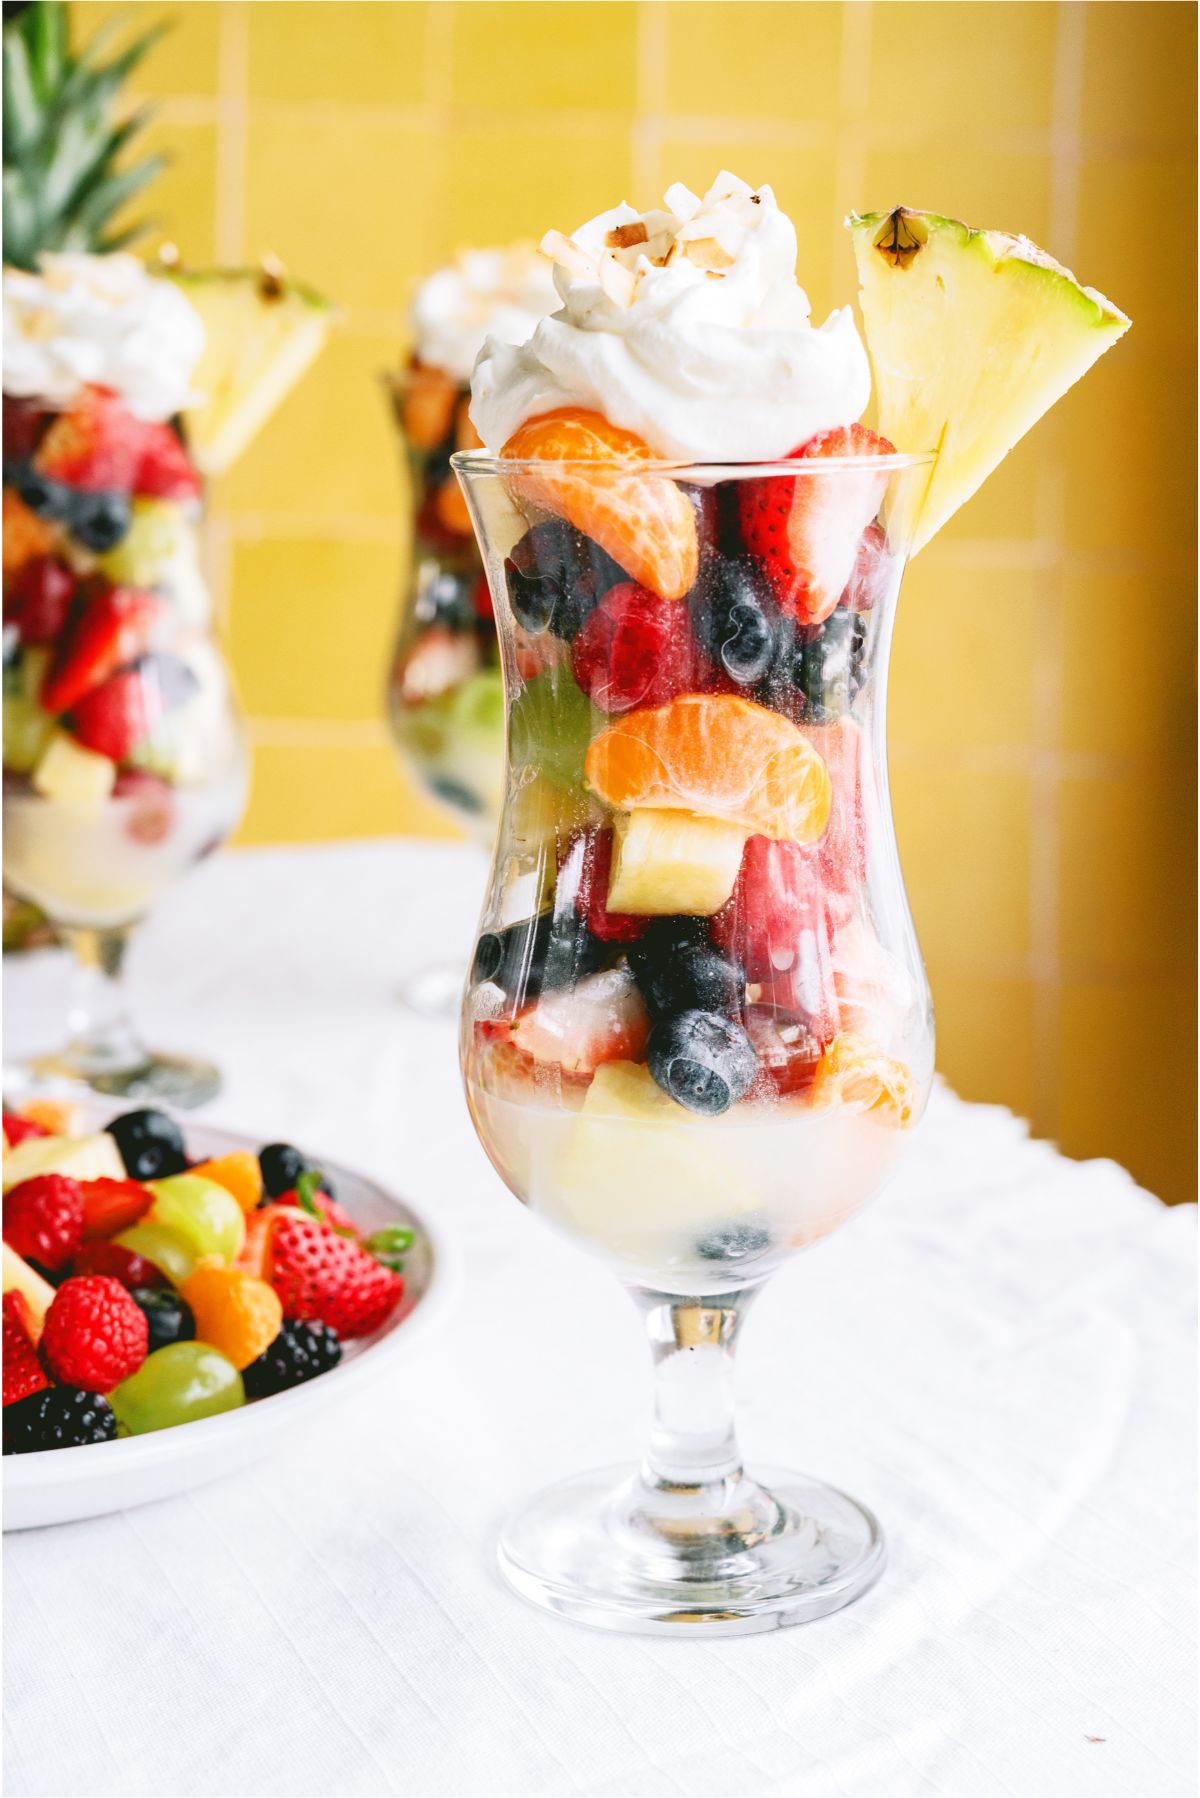 Pina Colada Fruit Salad in a glass topped with whip cream and garnished with a pineapple